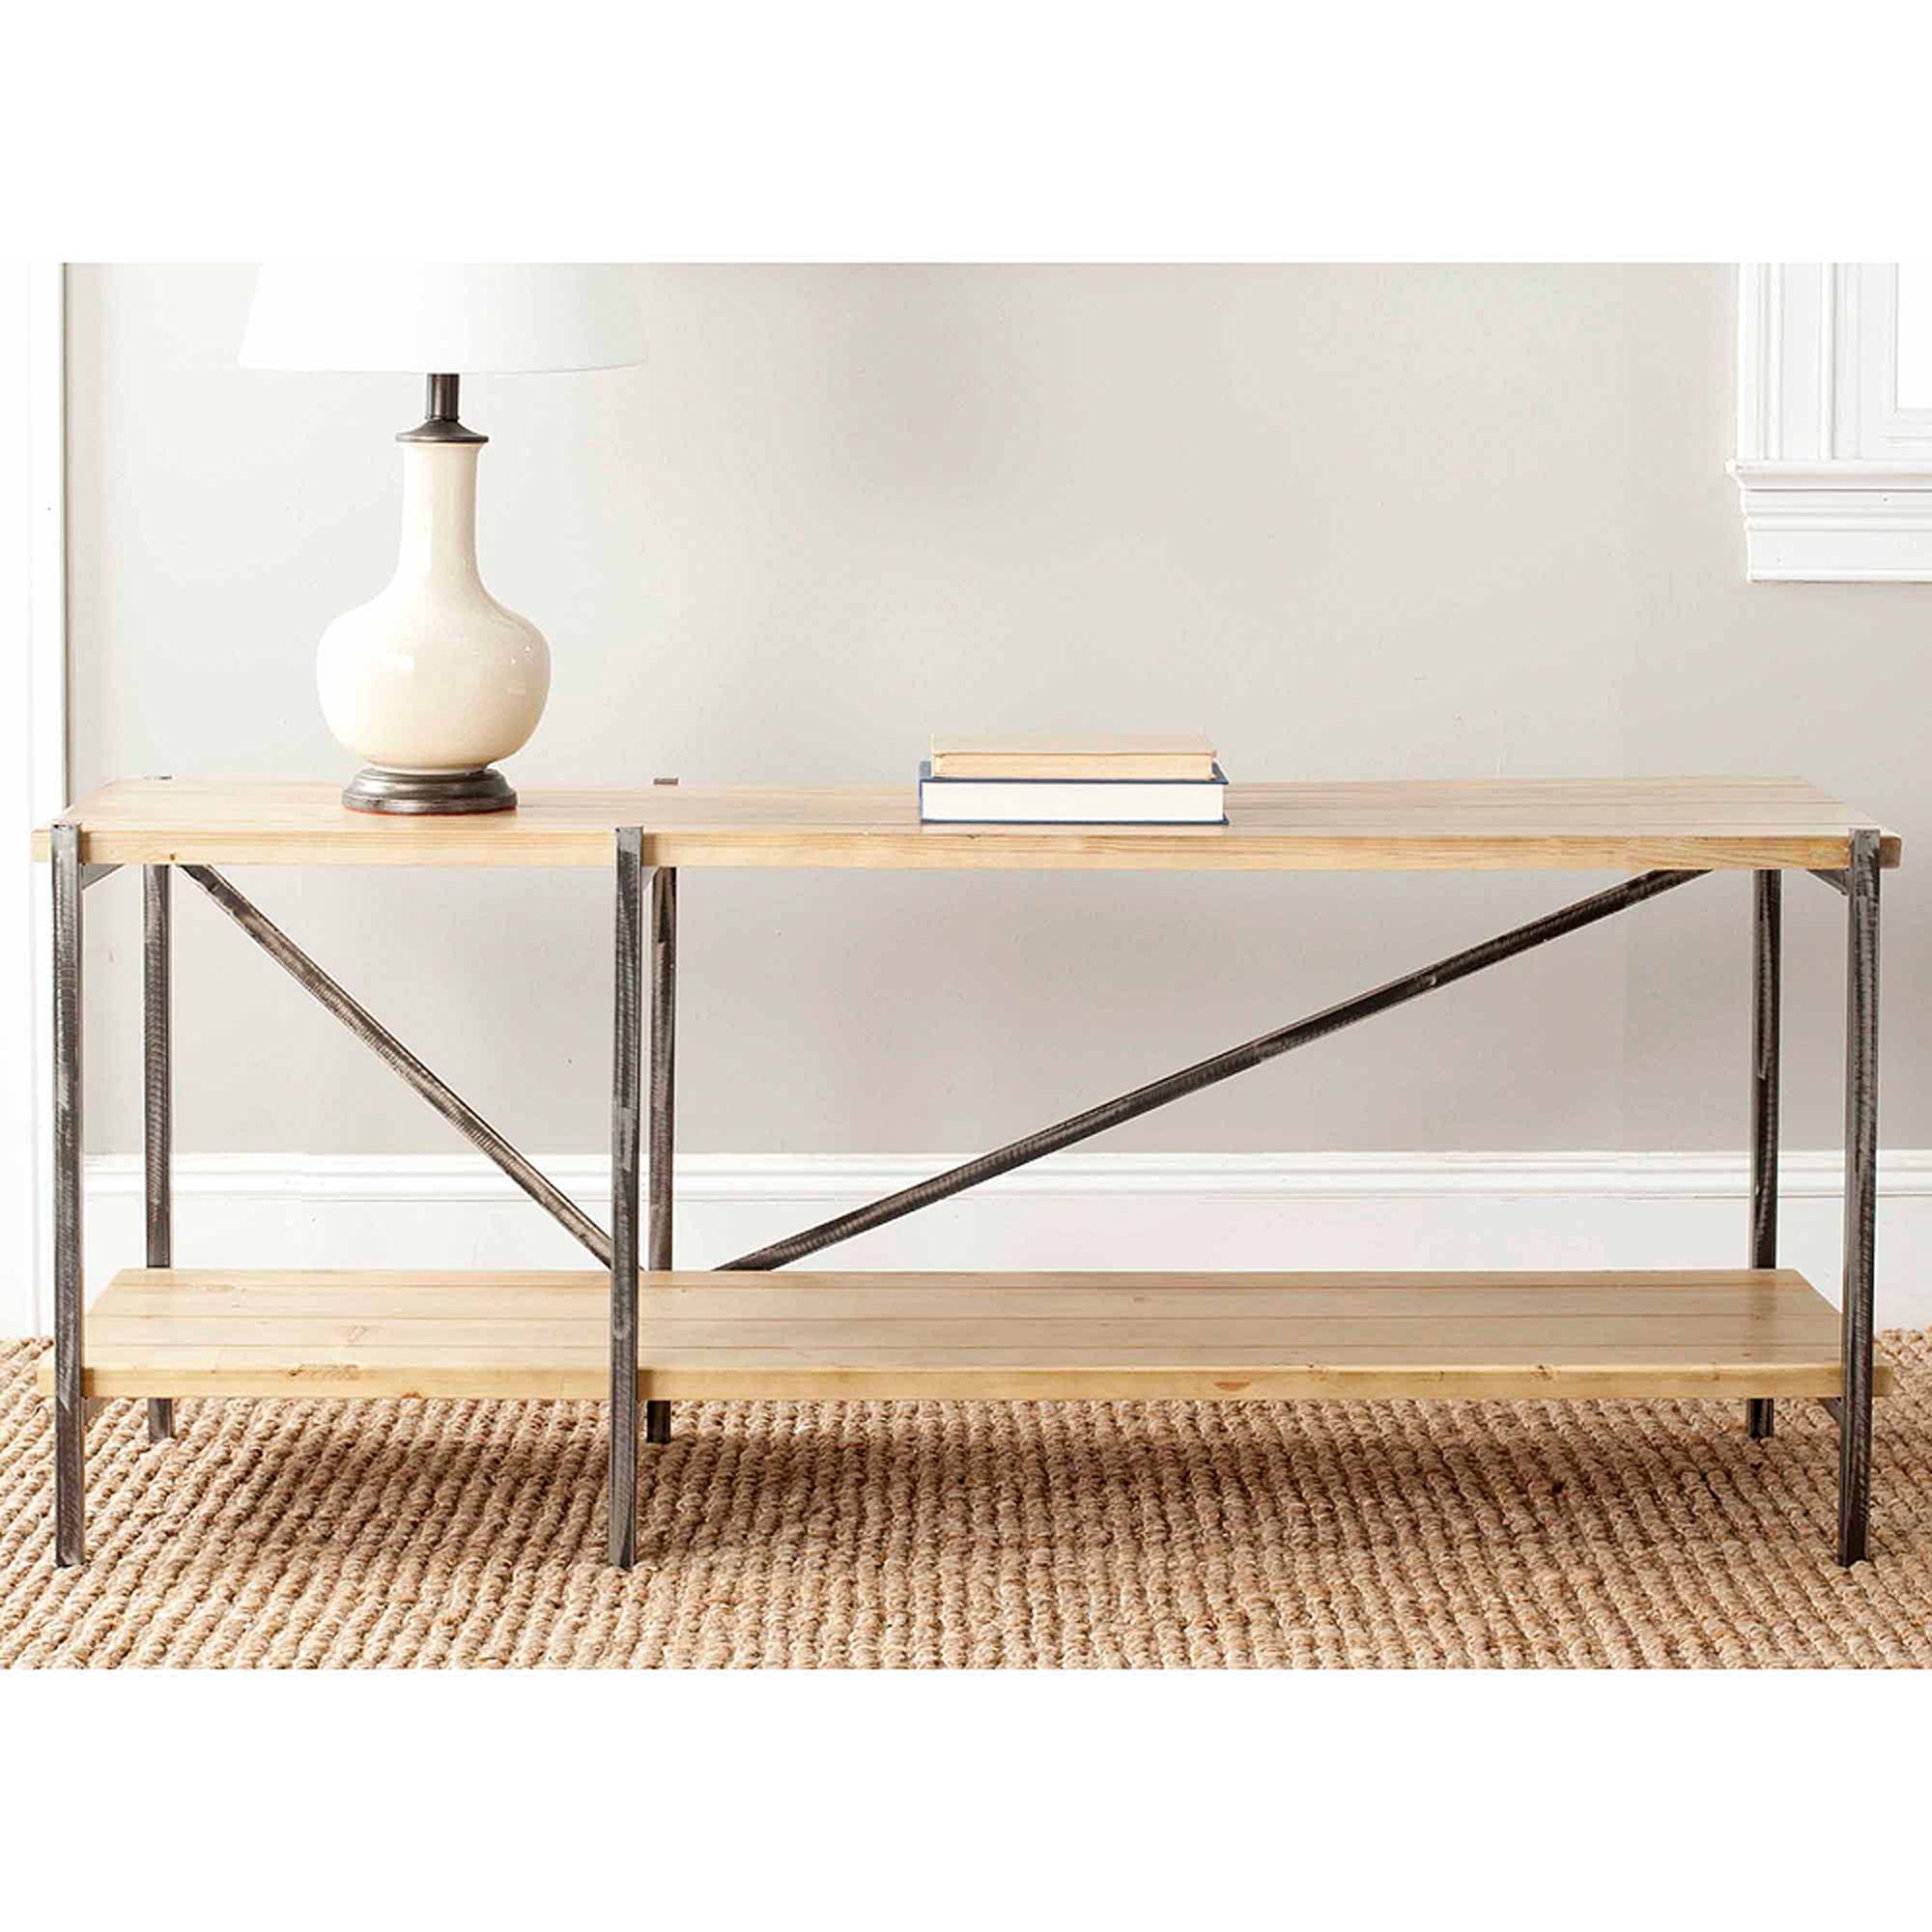 Safavieh Theodore Fir Wood Console, Natural Color Intended For Natural Wood Console Tables (View 12 of 20)